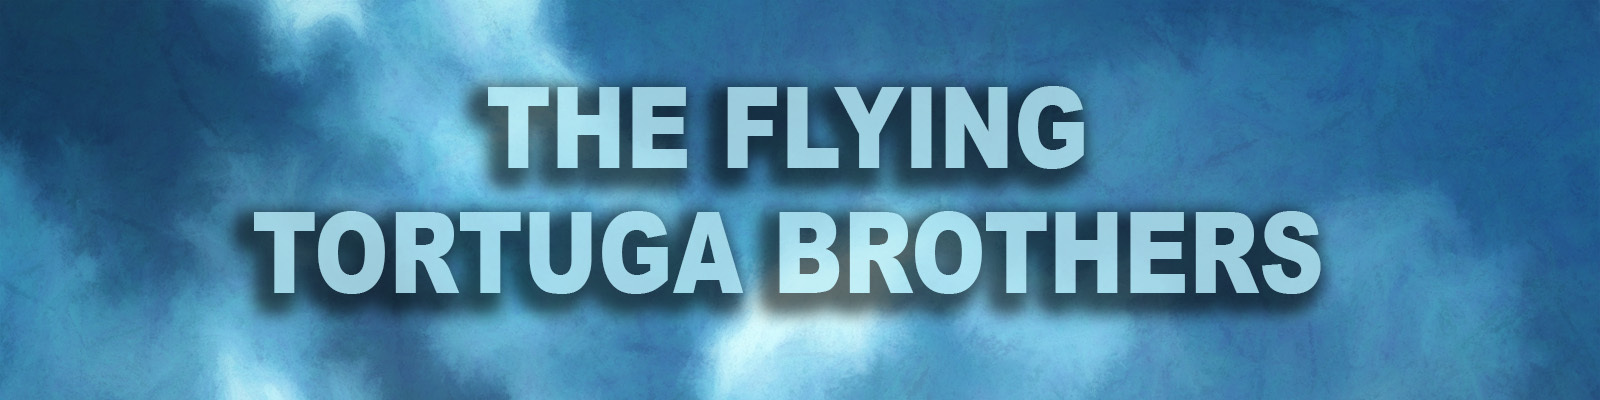 The flyingtortugabrother’s Podcast